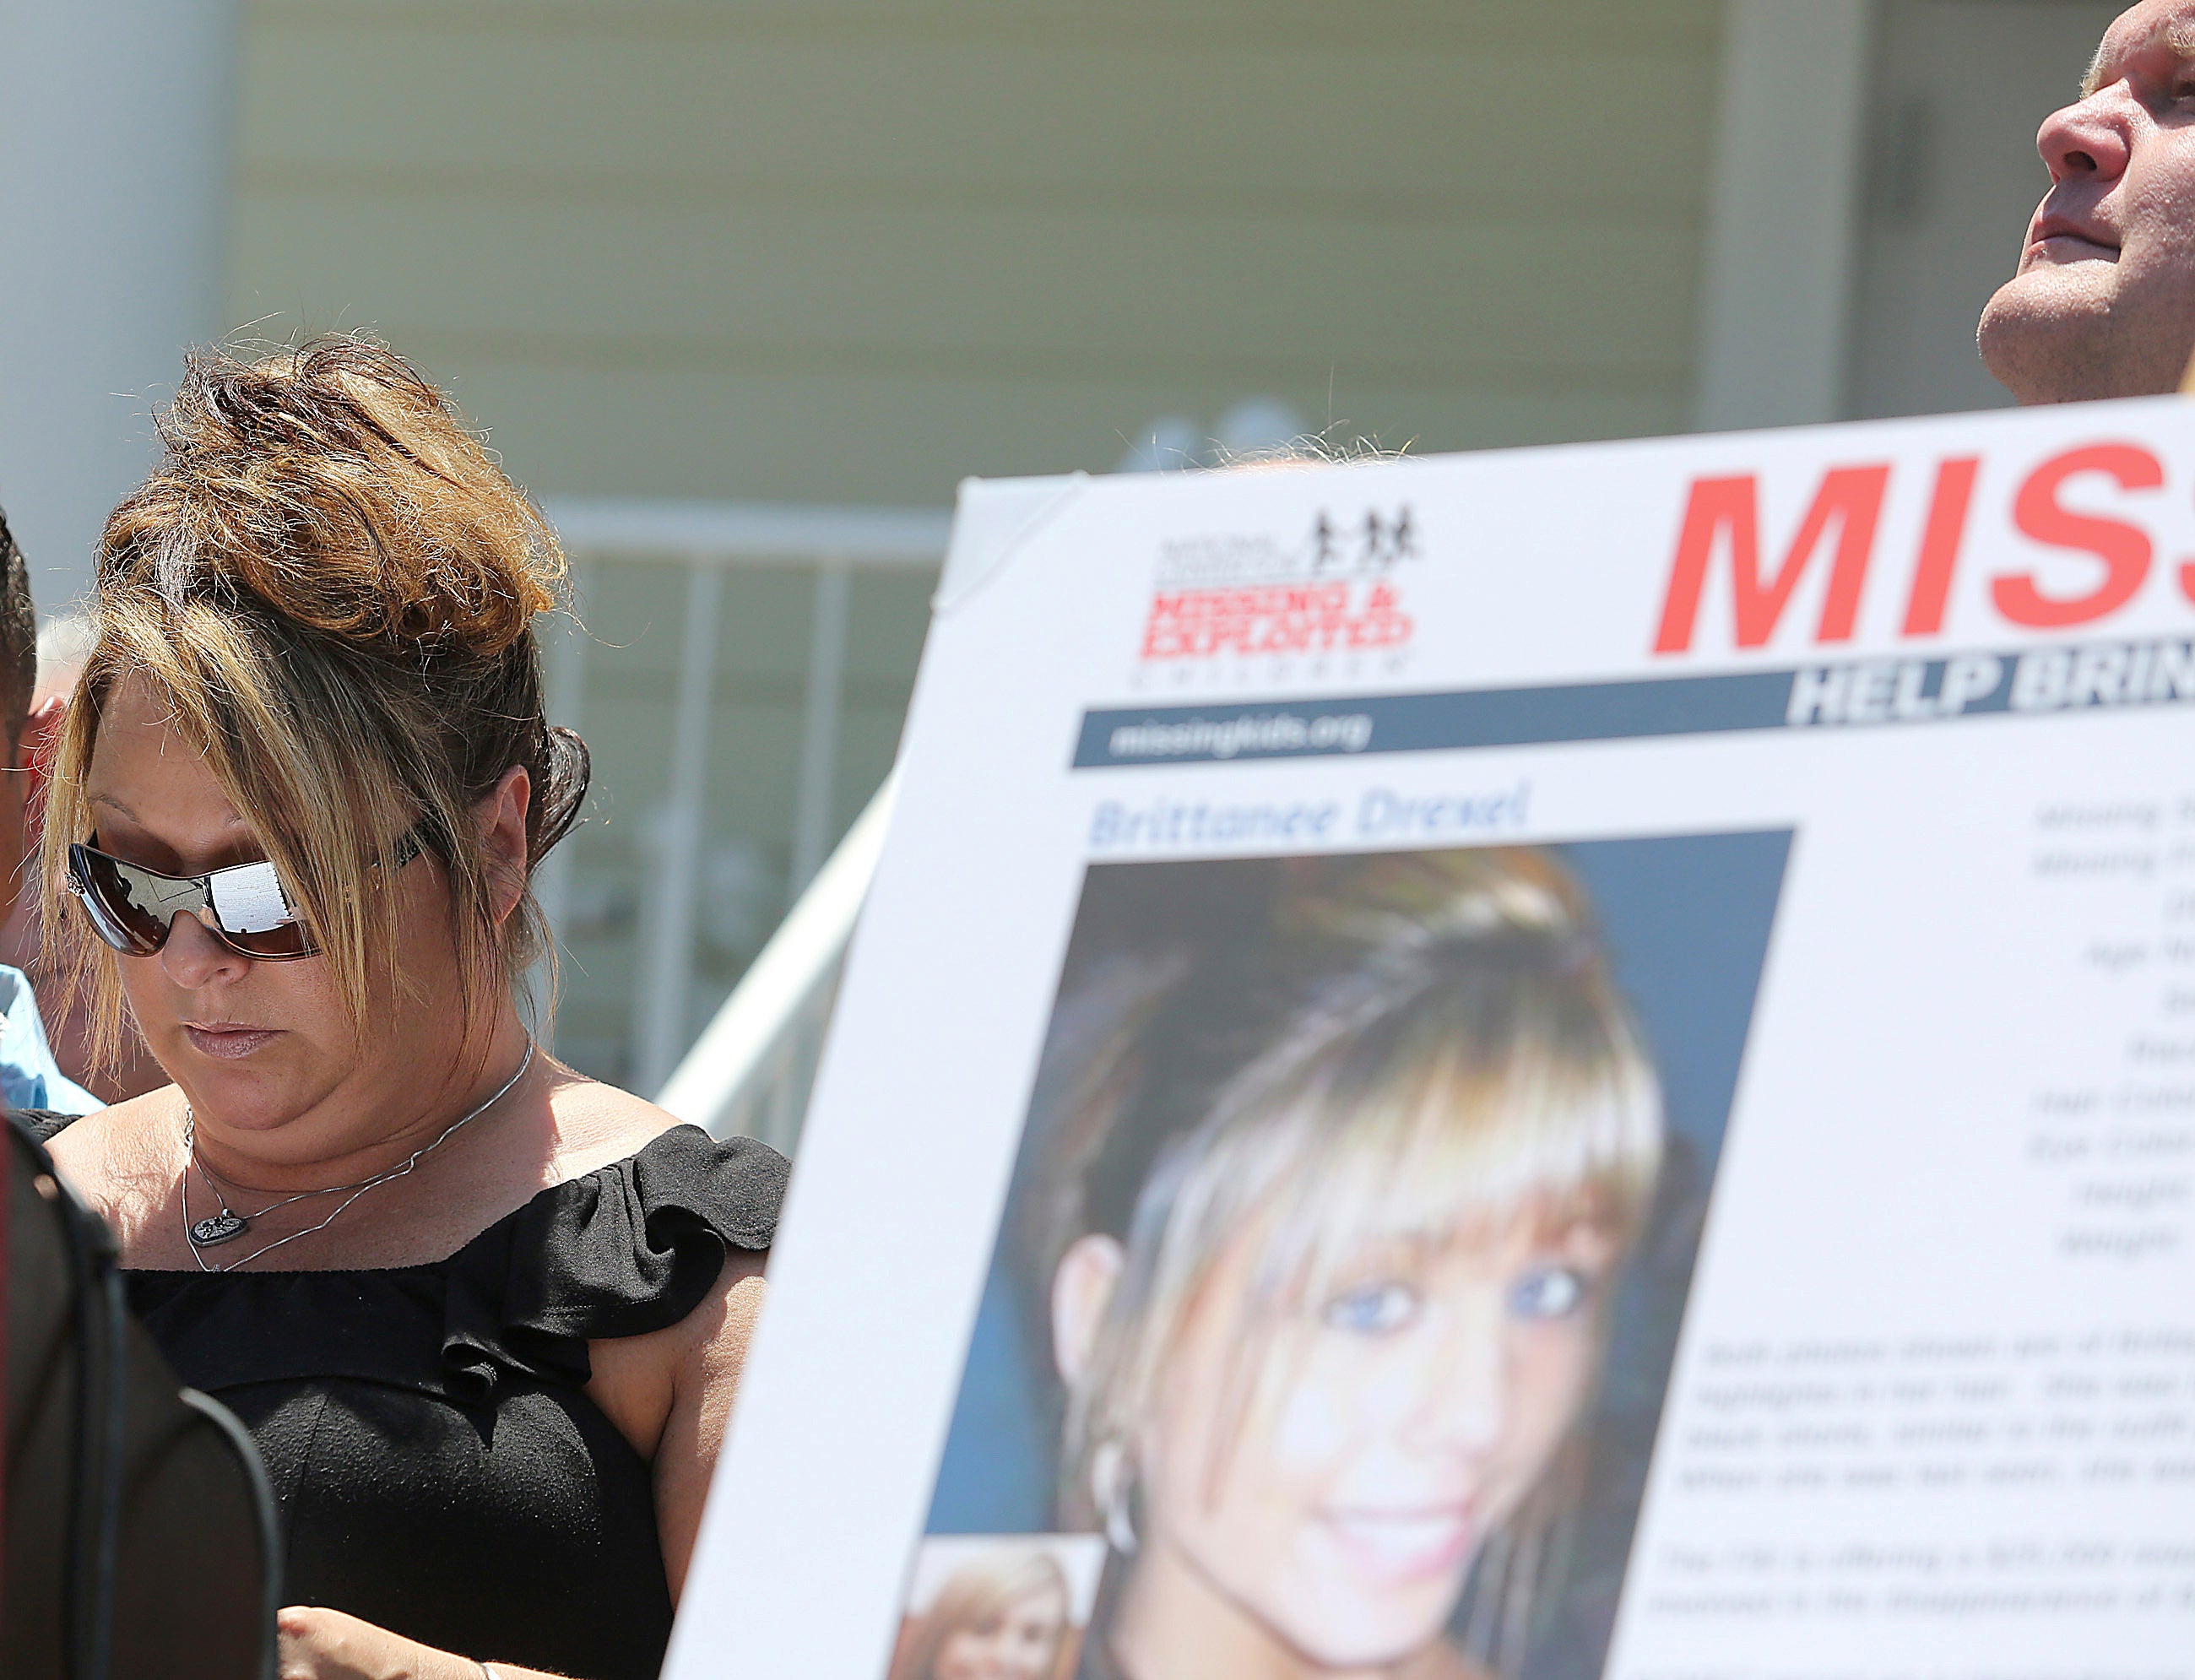 File photo: Dawn Drexel, mother of Brittanee Drexel, listens during a news conference in McClellanville on 8 June 2016